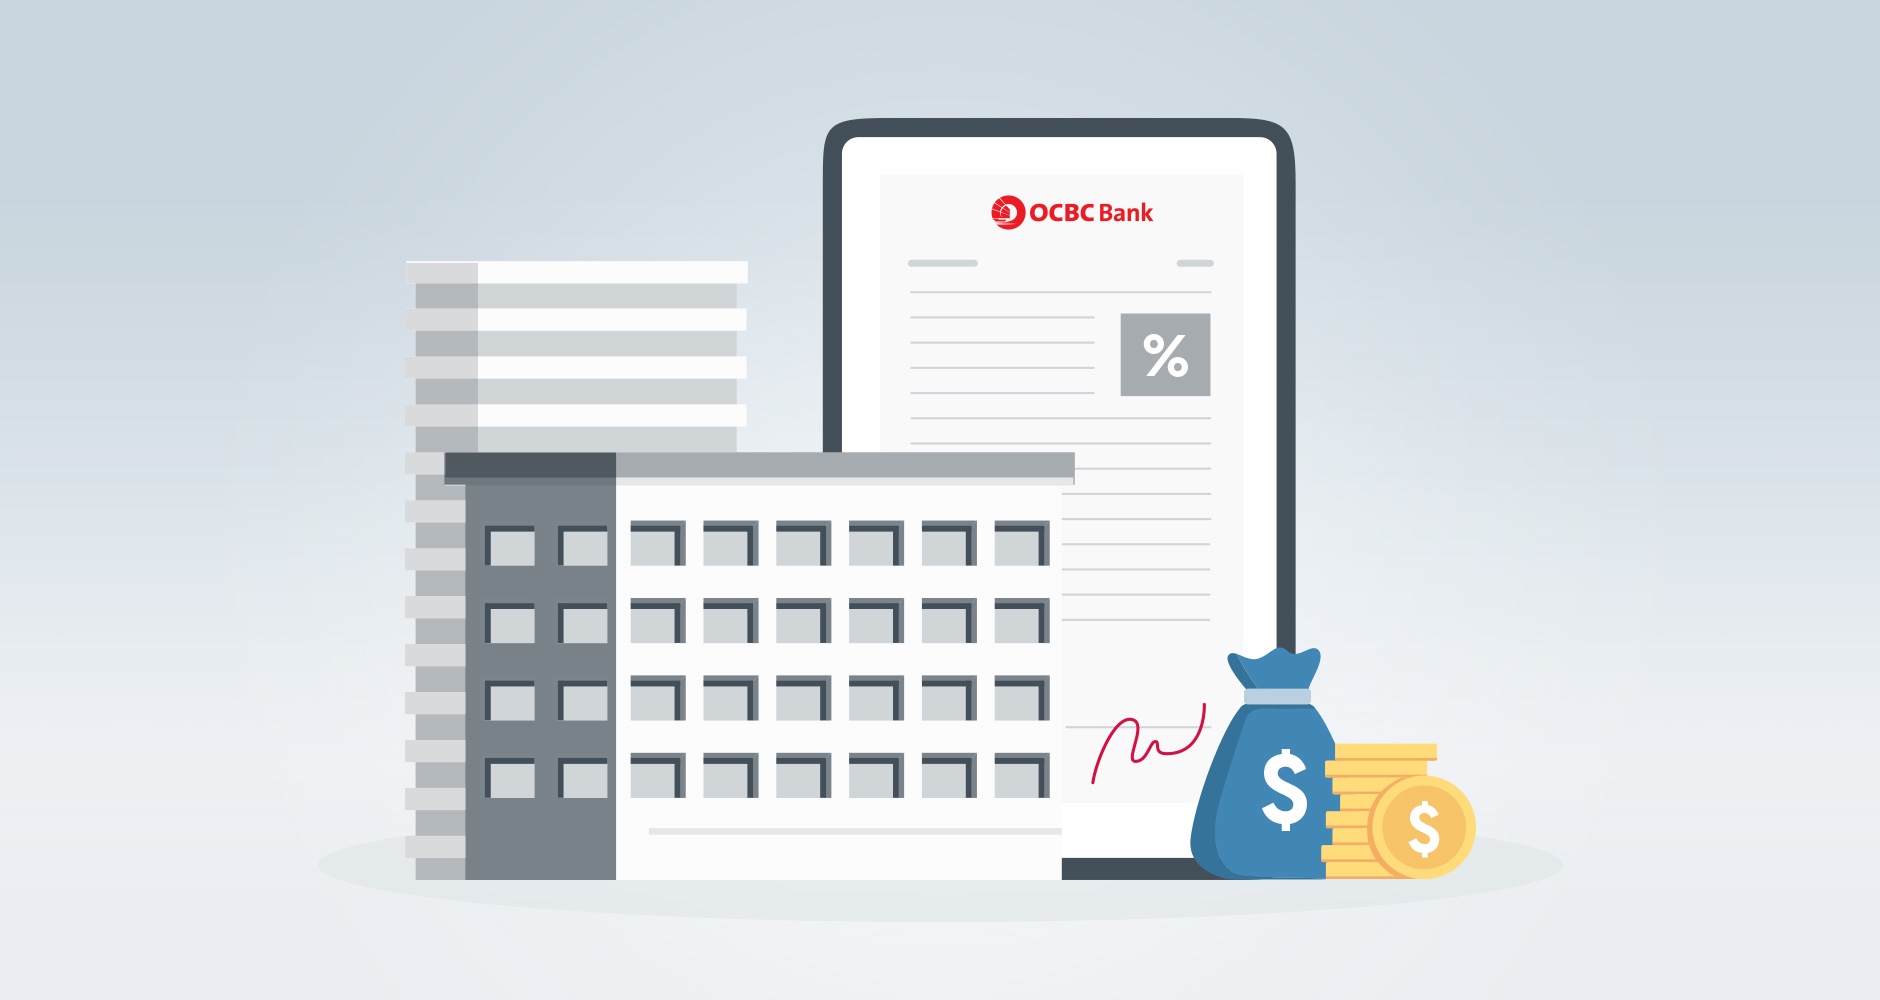 Refinance your existing Commercial Property Loan with OCBC Bank